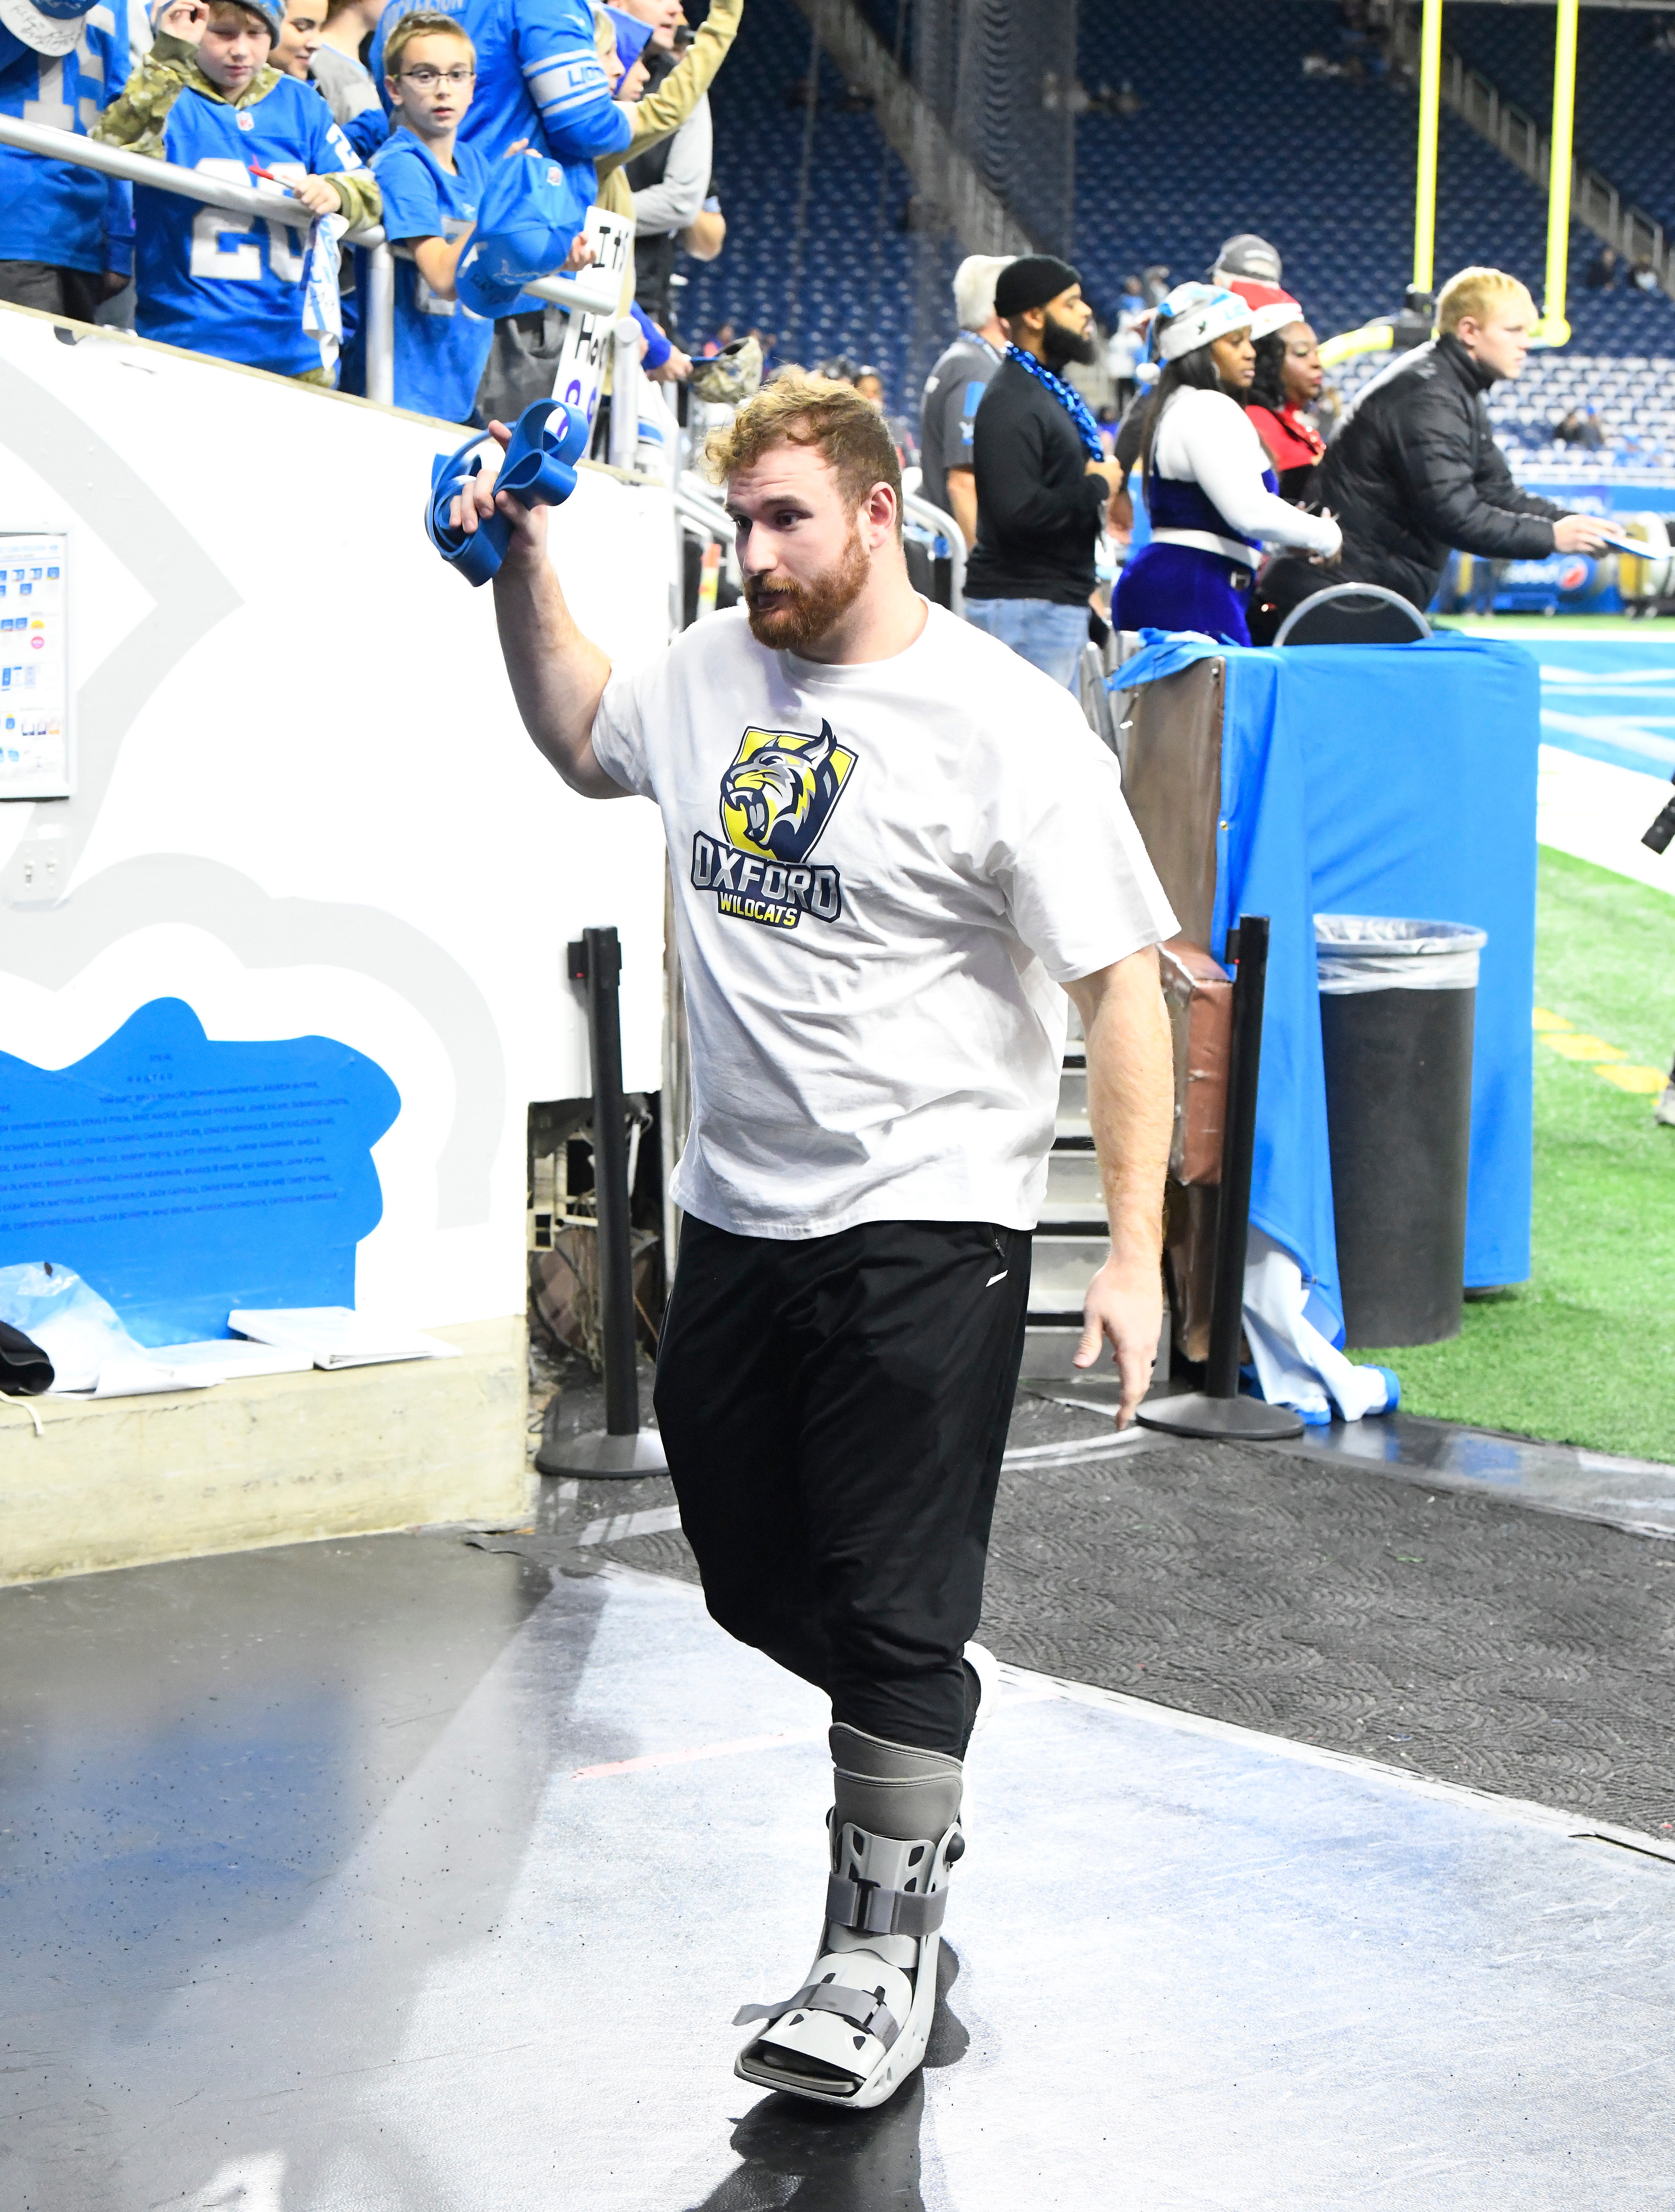 Injured Lions offensive linemen Frank Ragnow, wearing a Oxford Wildcats football t-shirt, goes off the field before game against the Vikings.